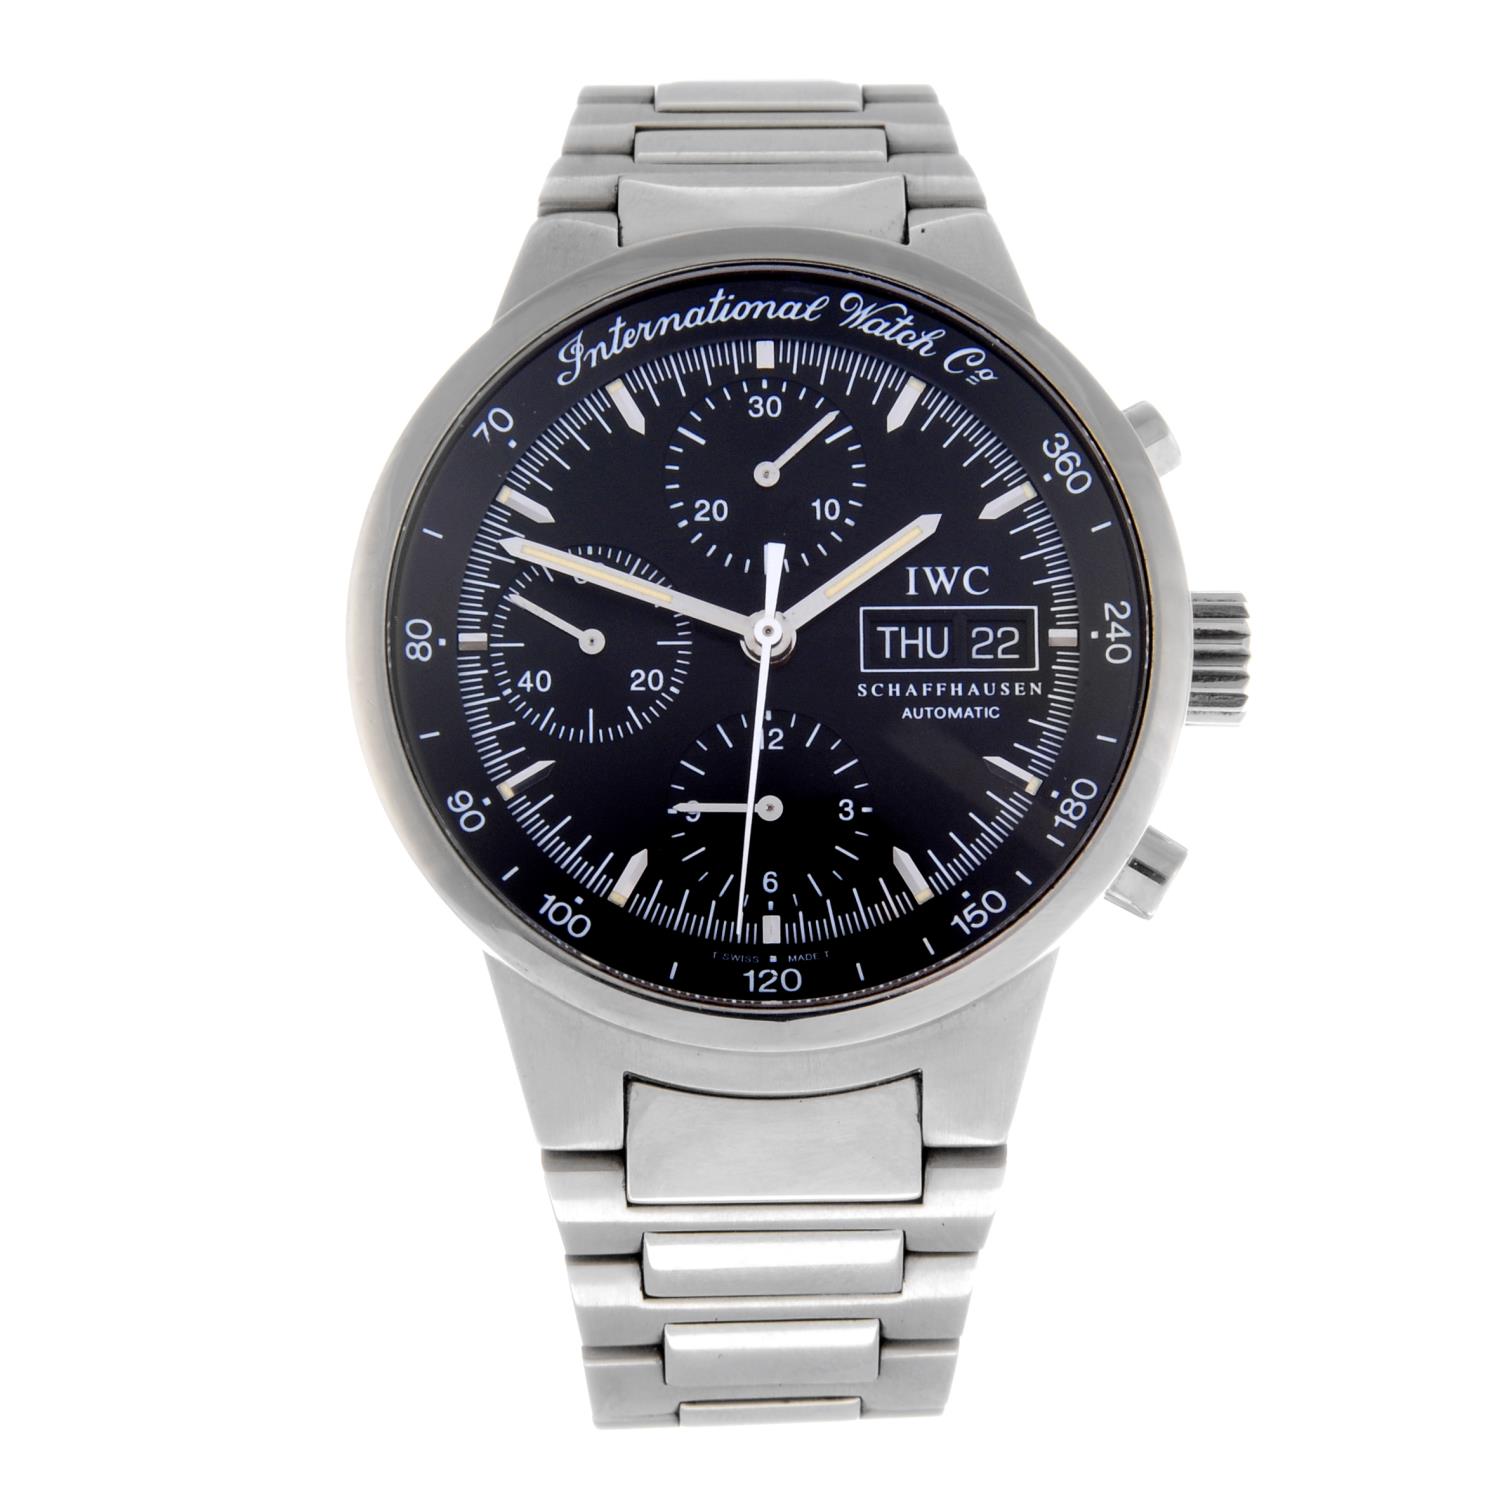 IWC - a gentleman's GST chronograph bracelet watch. Stainless steel case. Reference 3707, serial